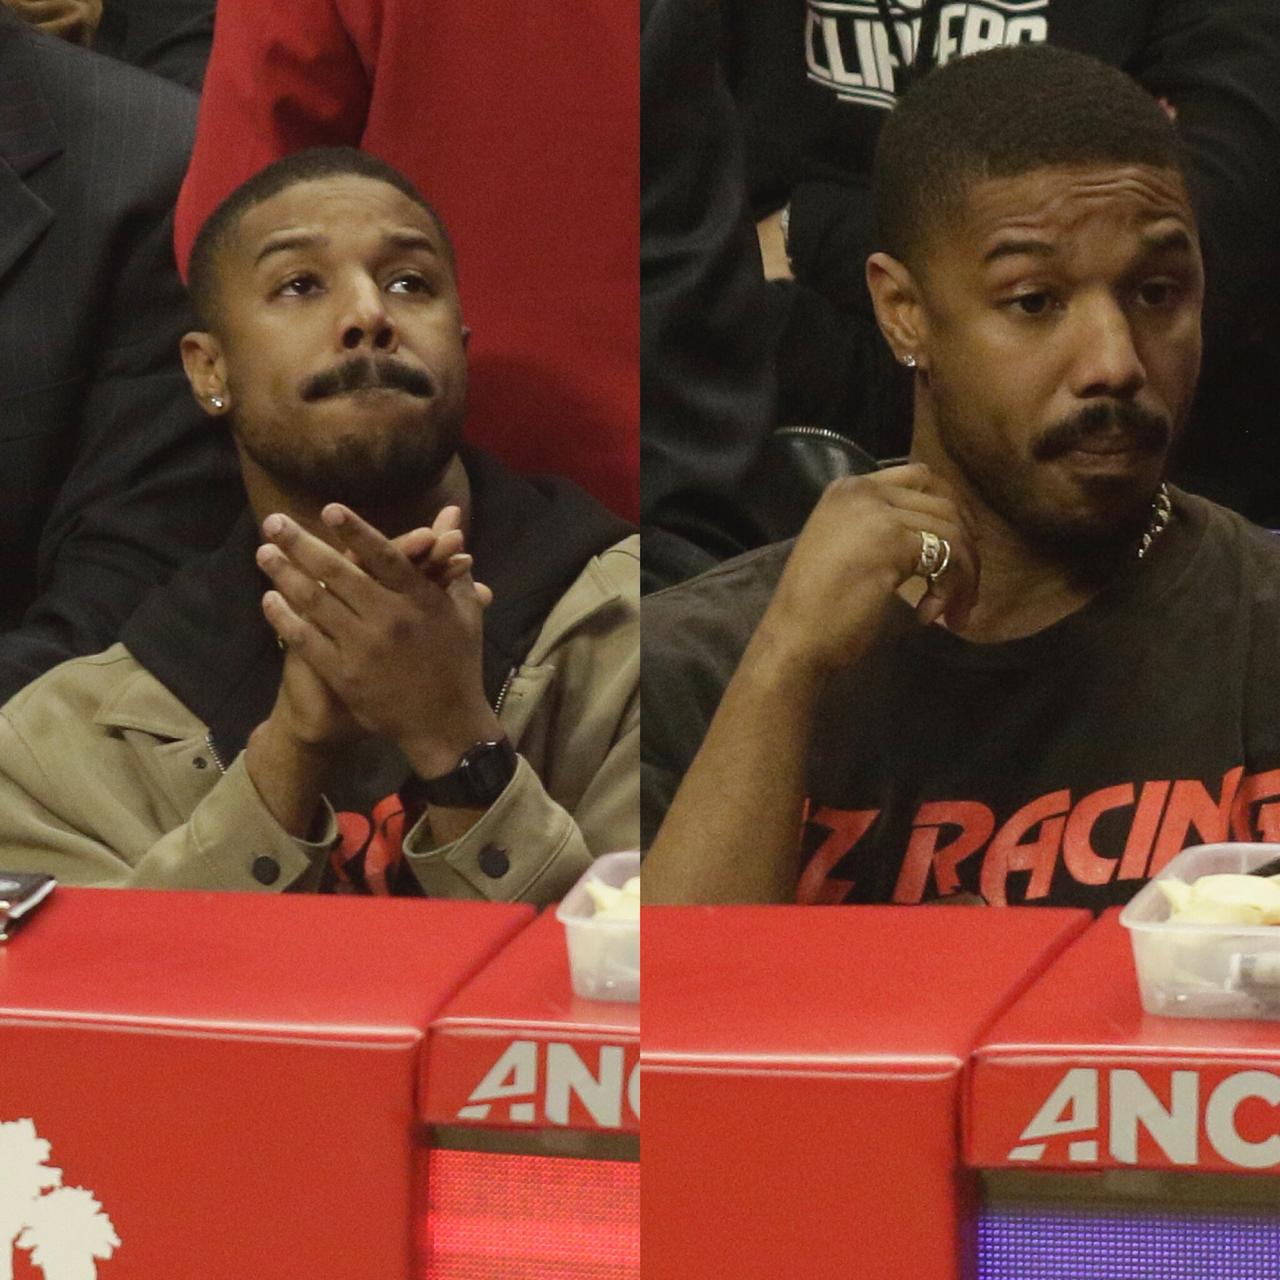 REQ: Michael B. Jordan attends a basketball game between the Los Angeles Clippers and the Houston Rockets @SPL